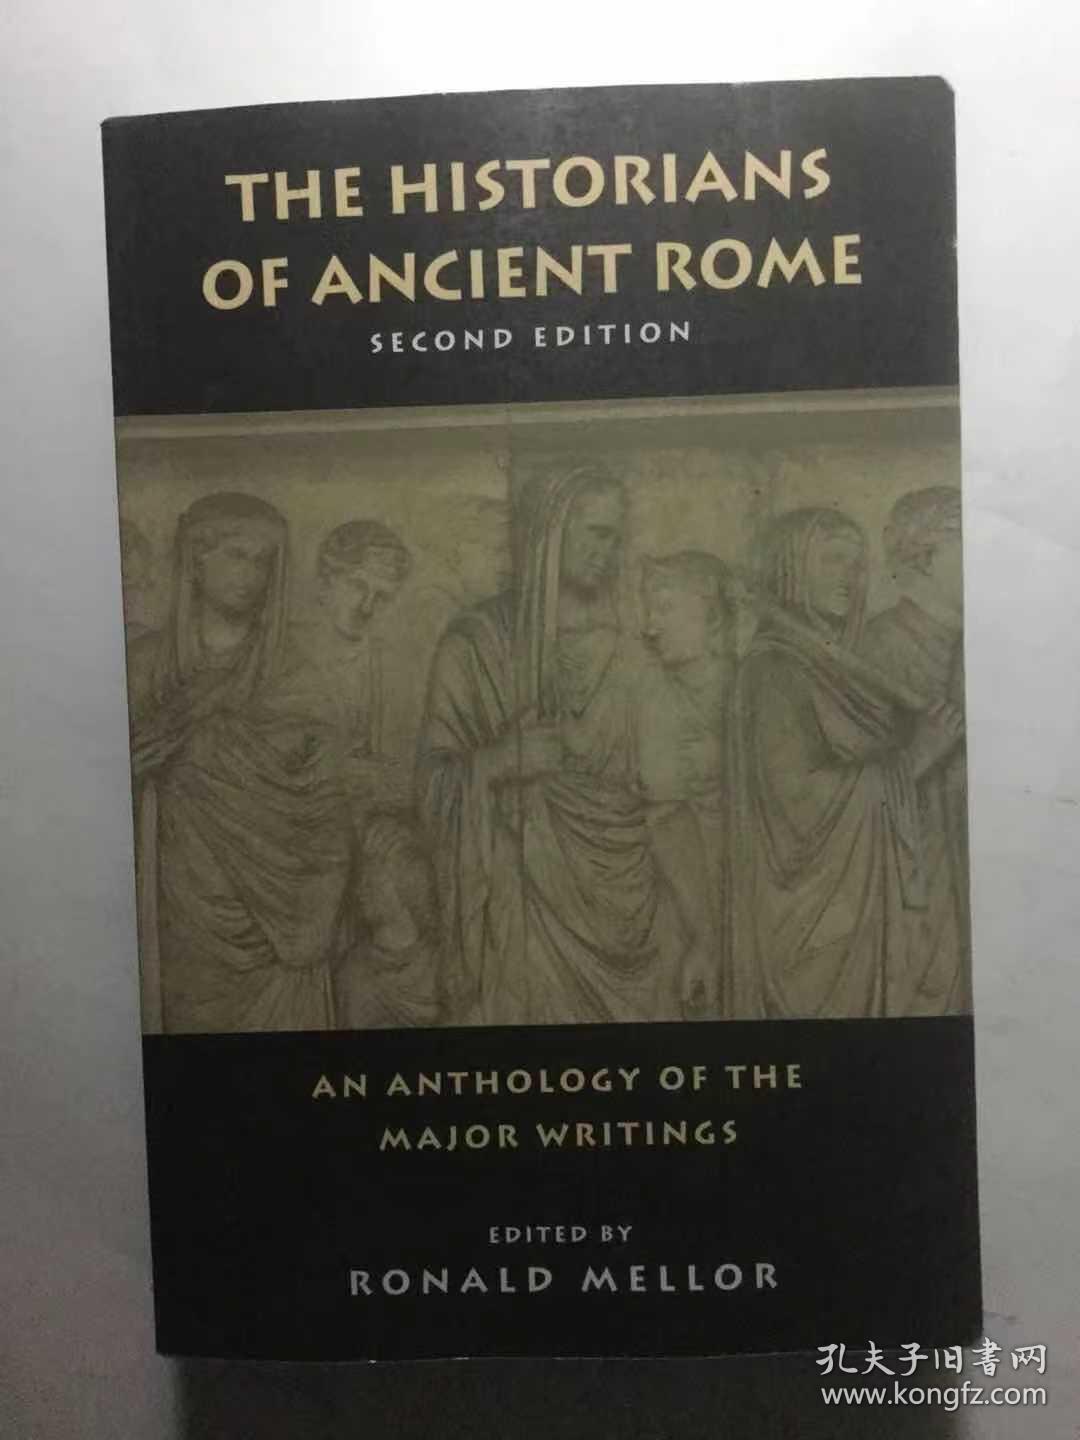 The Historians of Ancient Rome : An Anthology of the Major Writings